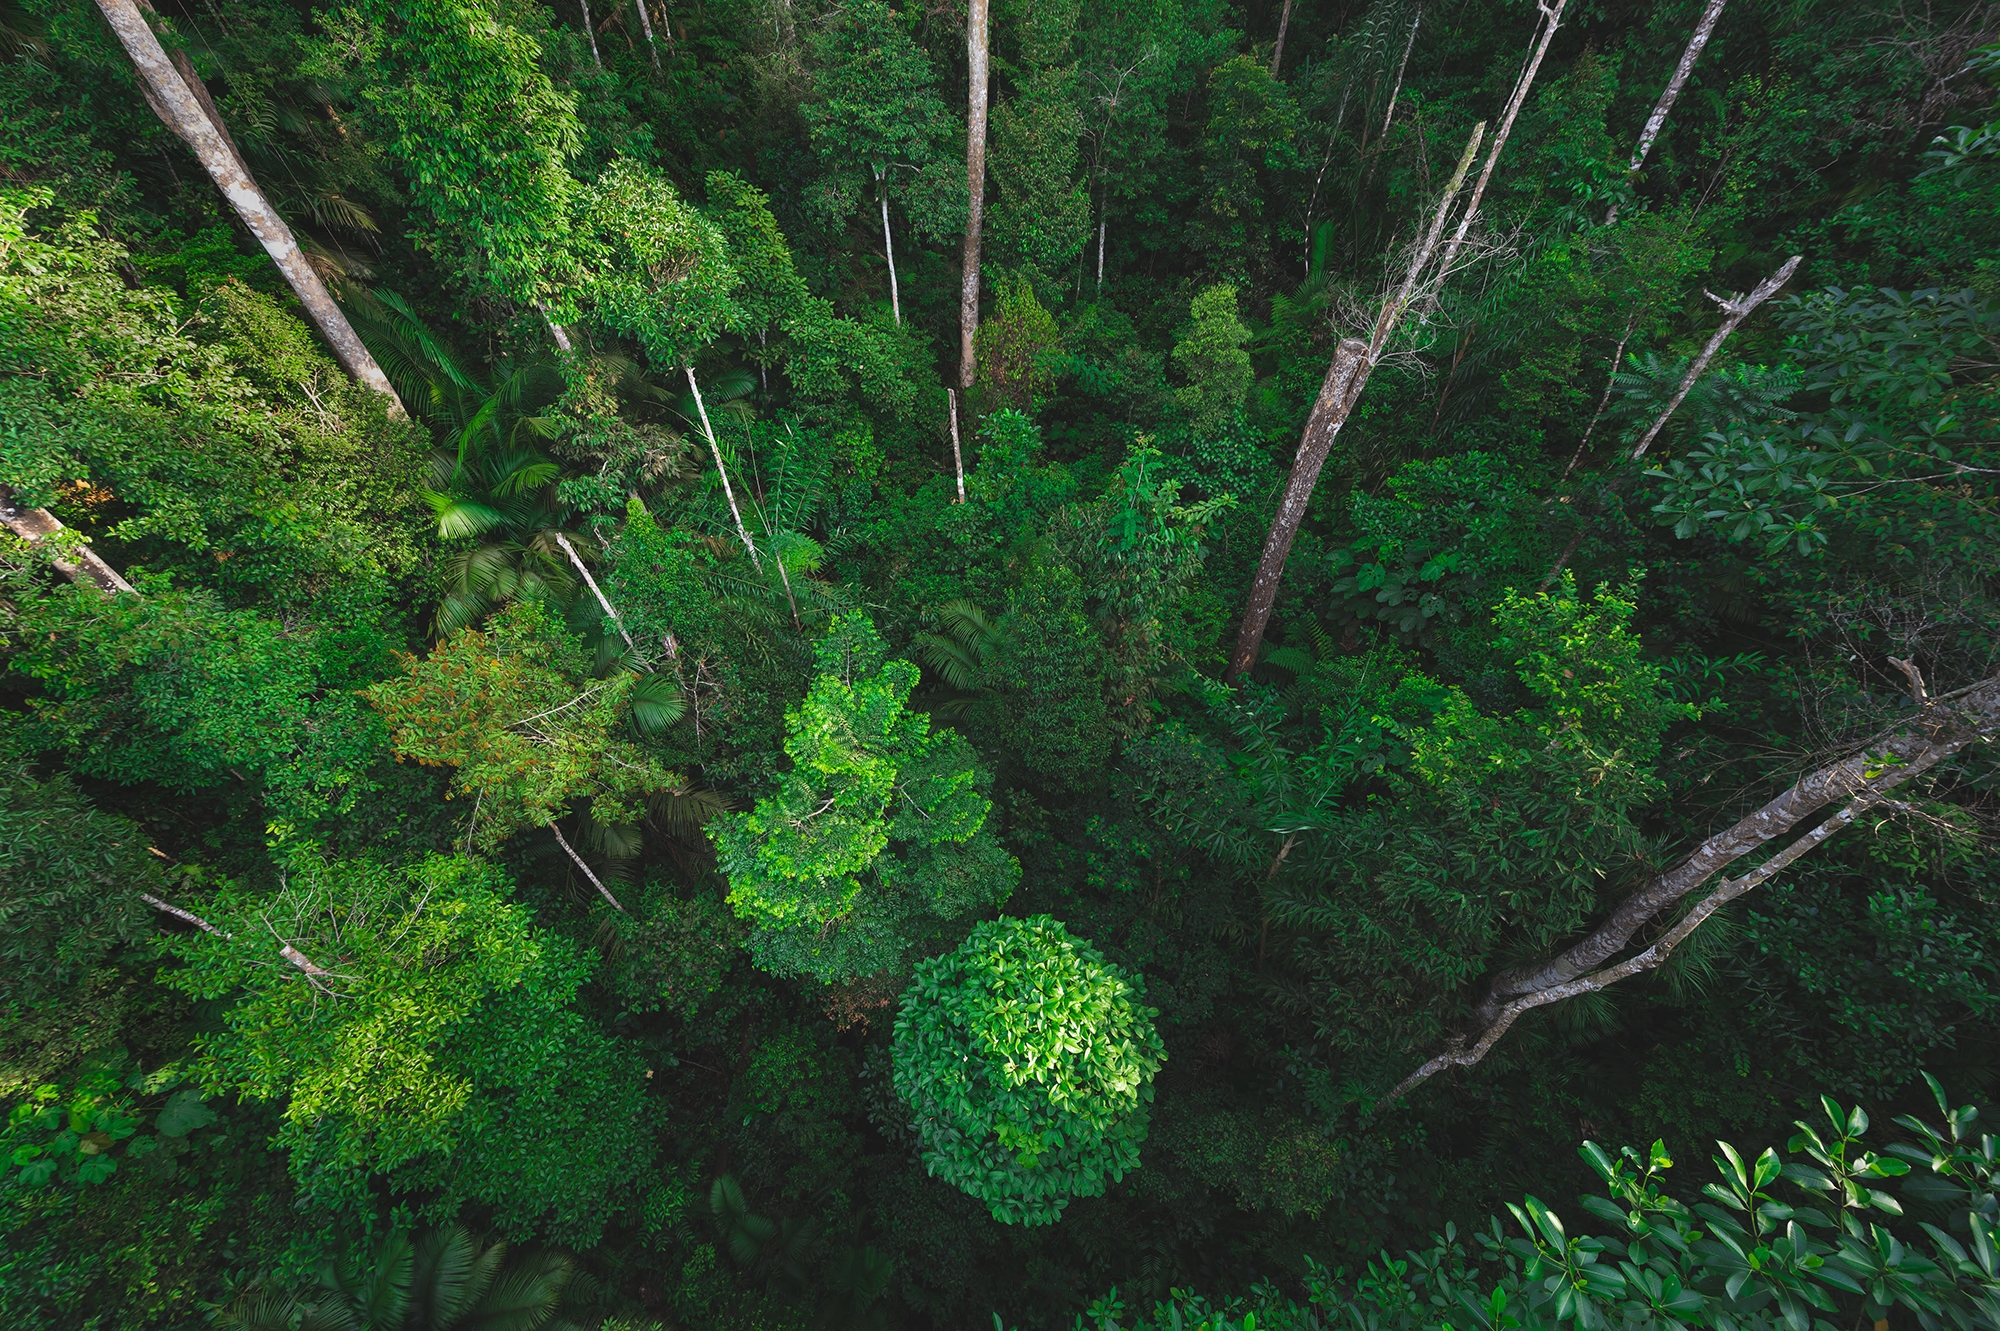 View of a forest canopy from above.